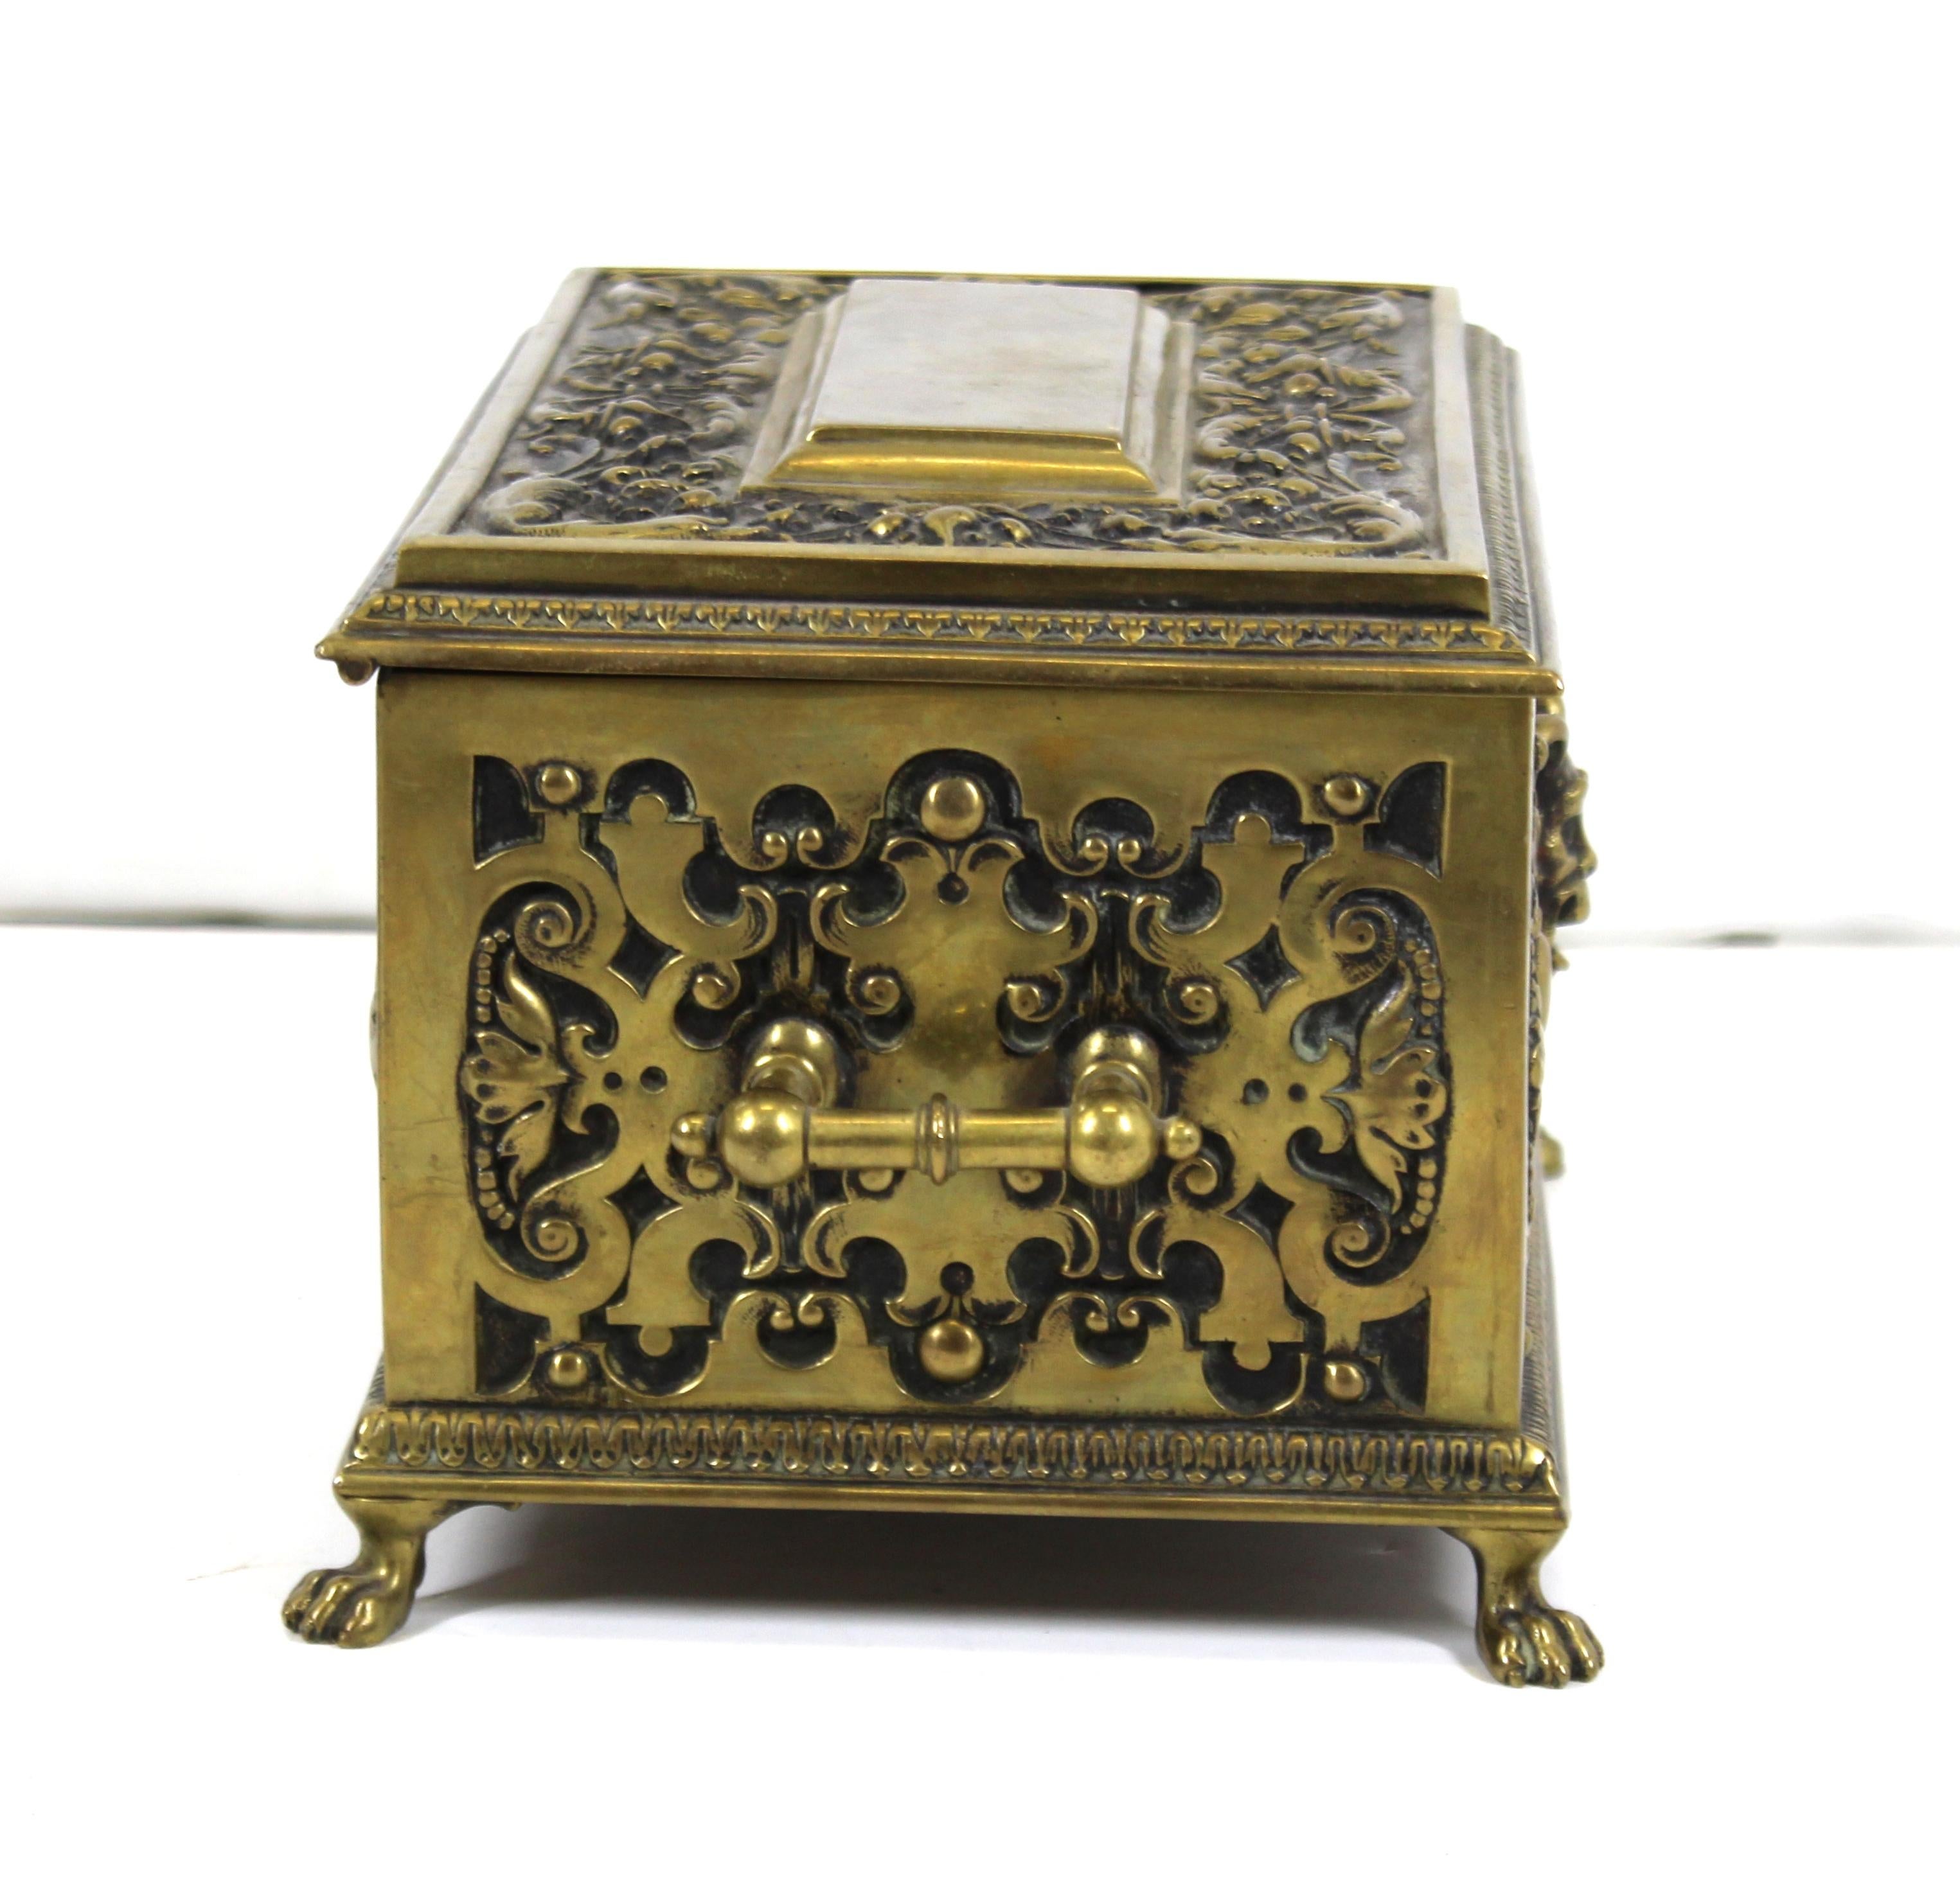 Late 19th Century American Aesthetic Movement Ornate Cast Bronze Casket Humidor Box with Grotesque